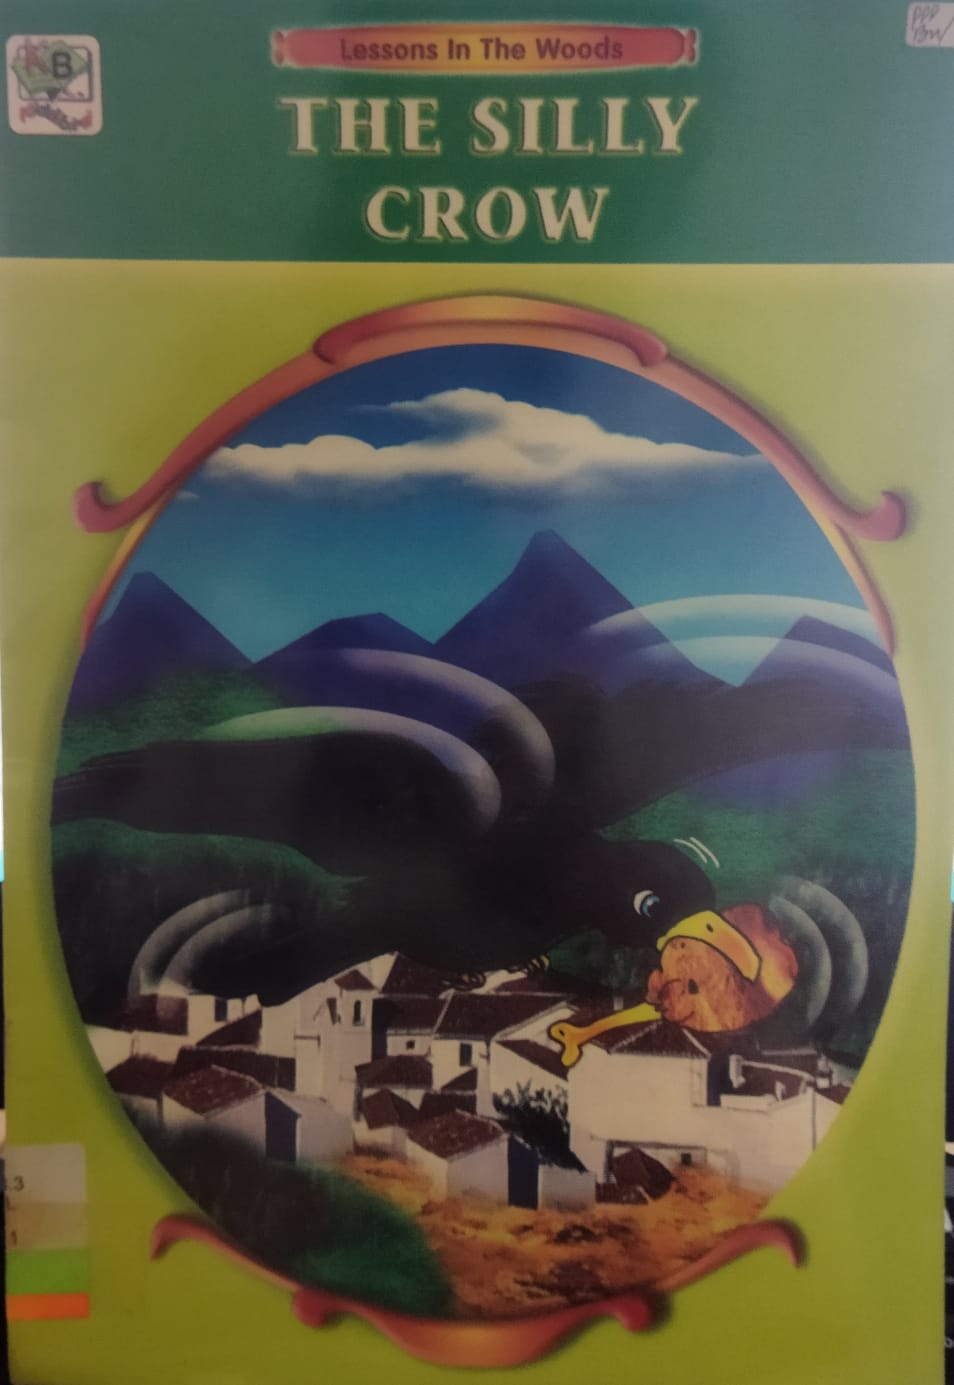 The Silly Crow